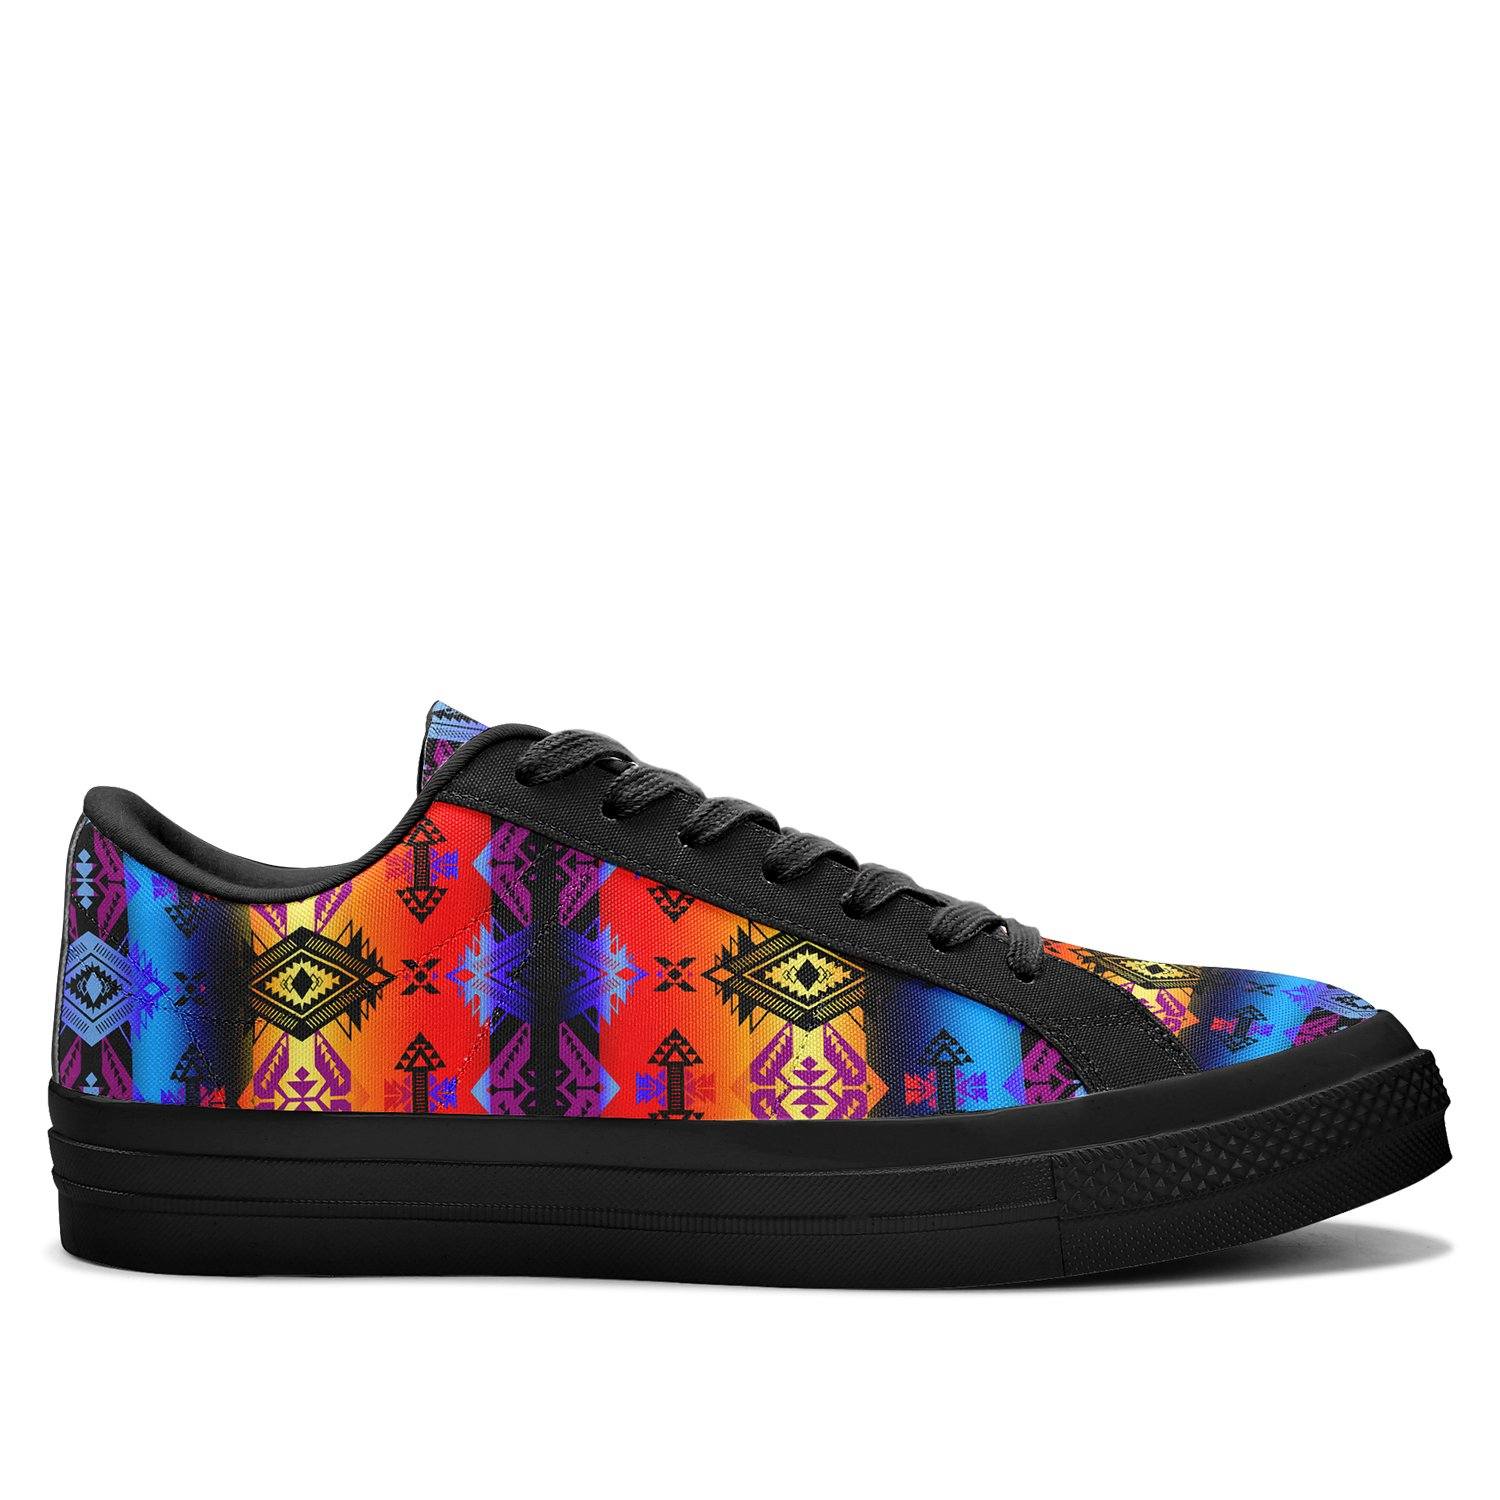 Sovereign Nation Sunset Aapisi Low Top Canvas Shoes Black Sole 49 Dzine 